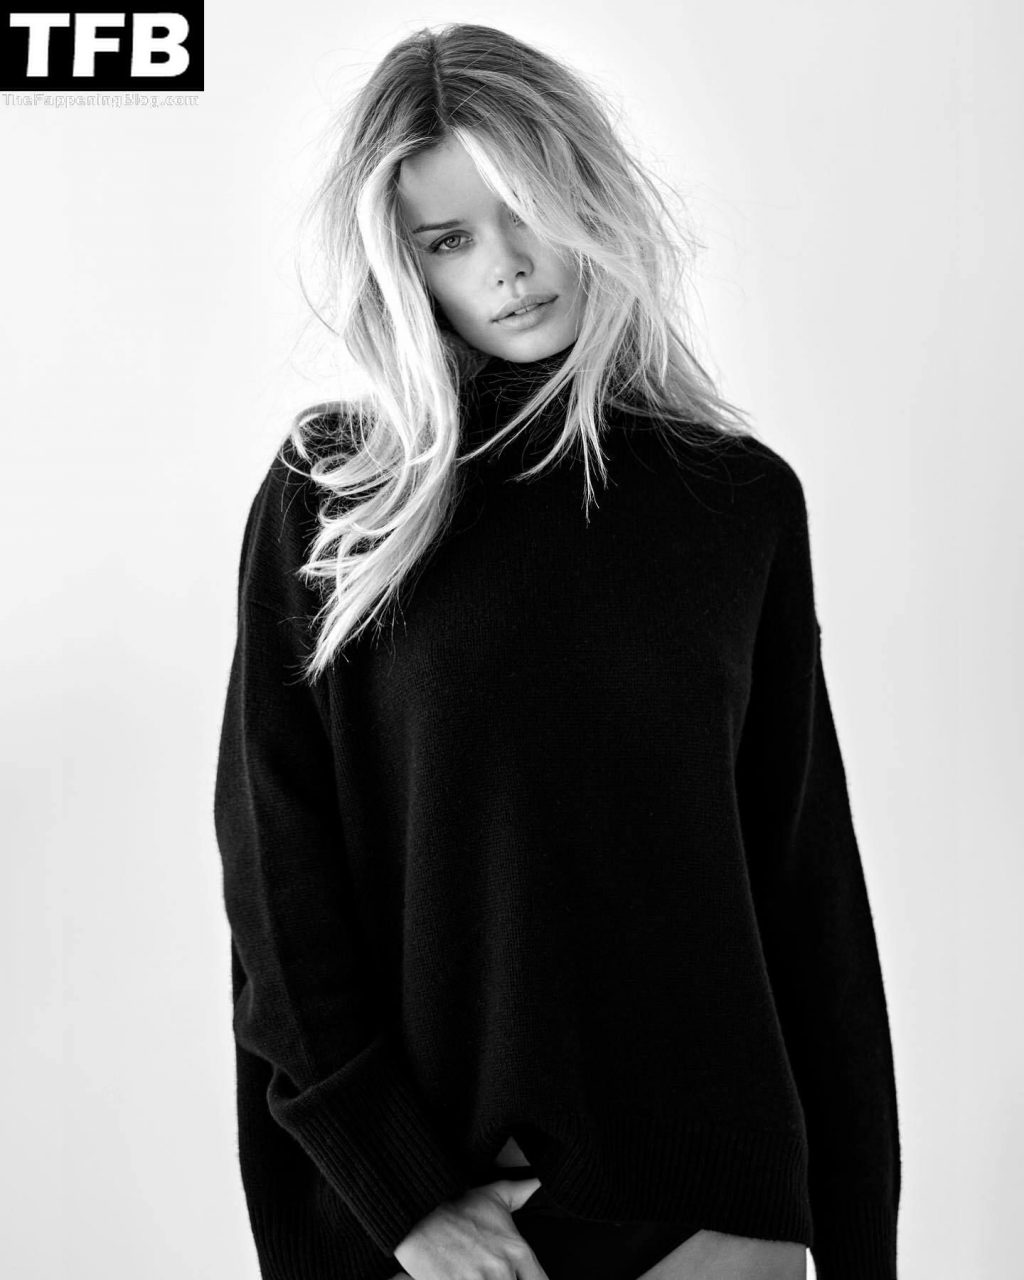 Frida Aasen Shows Her Gorgeous Figure in a New Shoot (20 Photos)